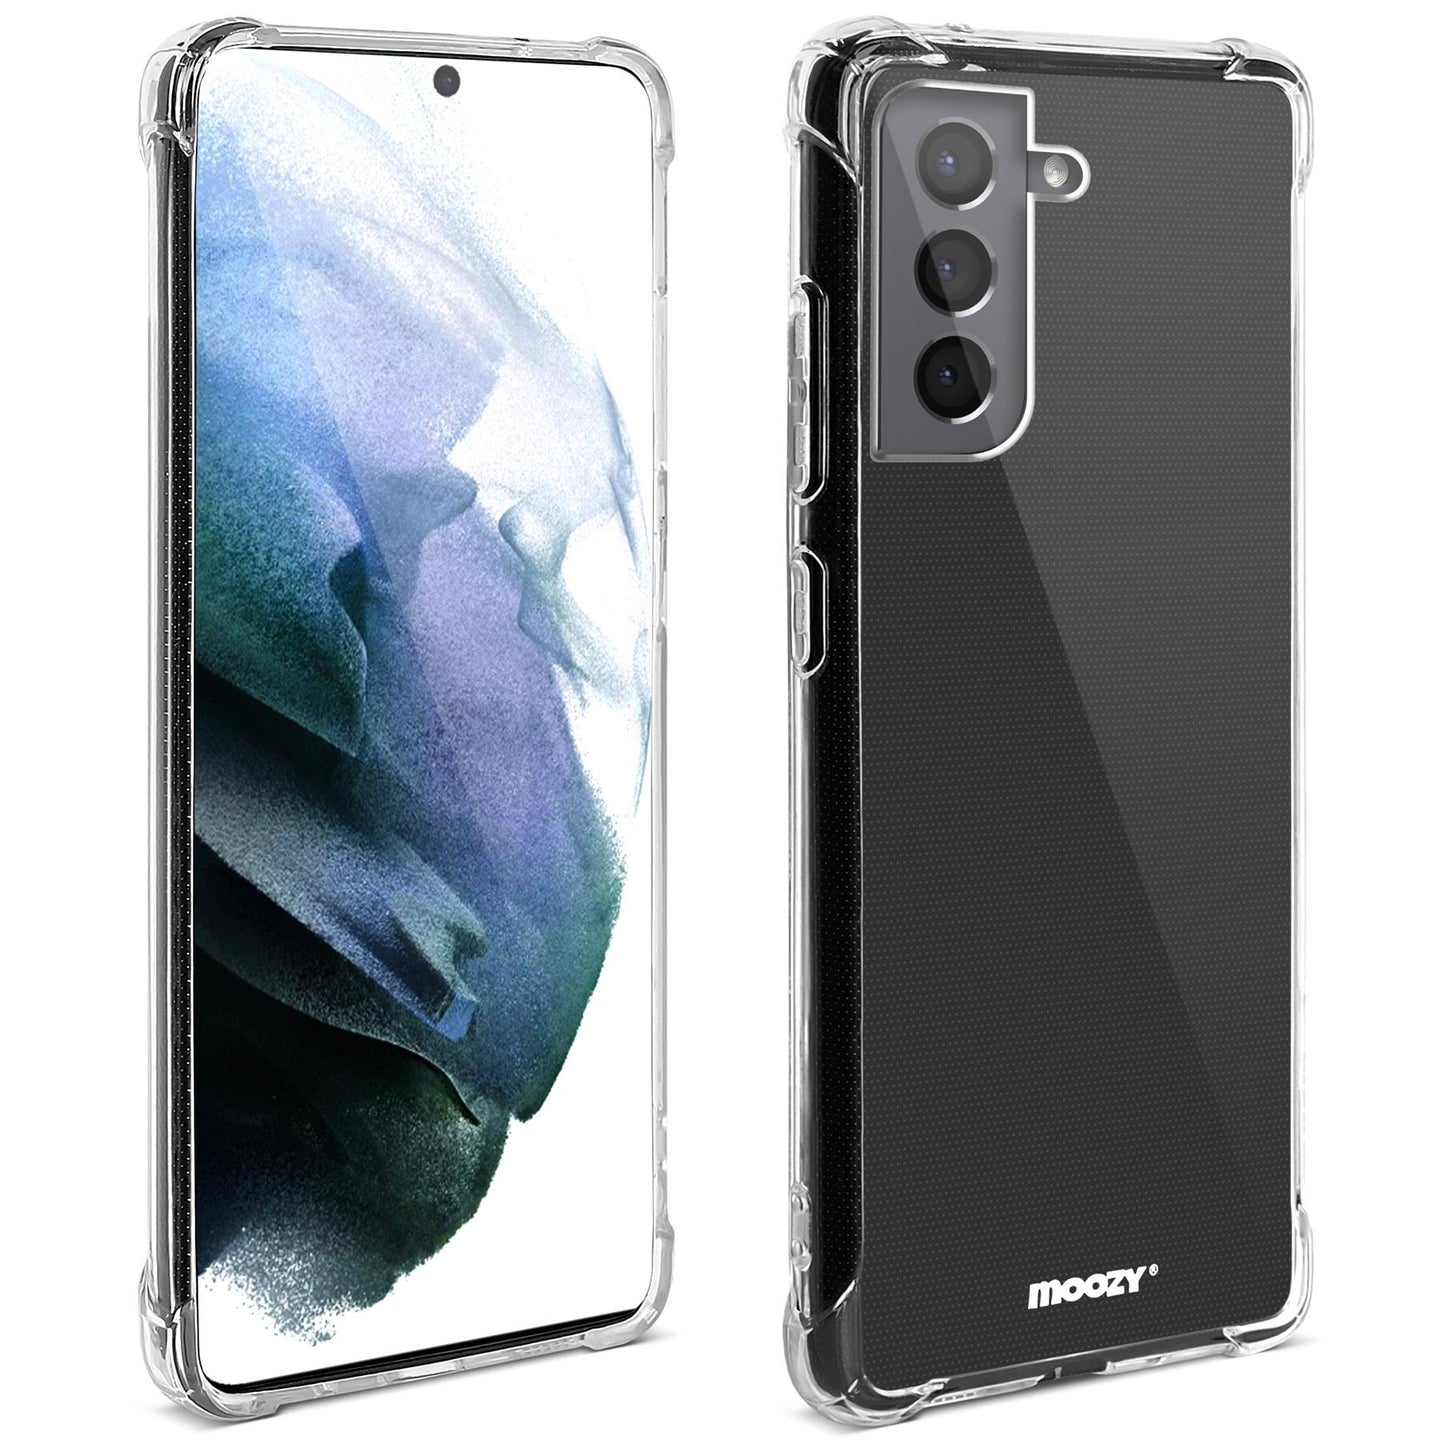 Moozy Shockproof Silicone Case for Samsung S21 5G and 4G - Transparent Case with Shock Absorbing 3D Corners Crystal Clear Protective Phone Case Soft TPU Silicone Cover